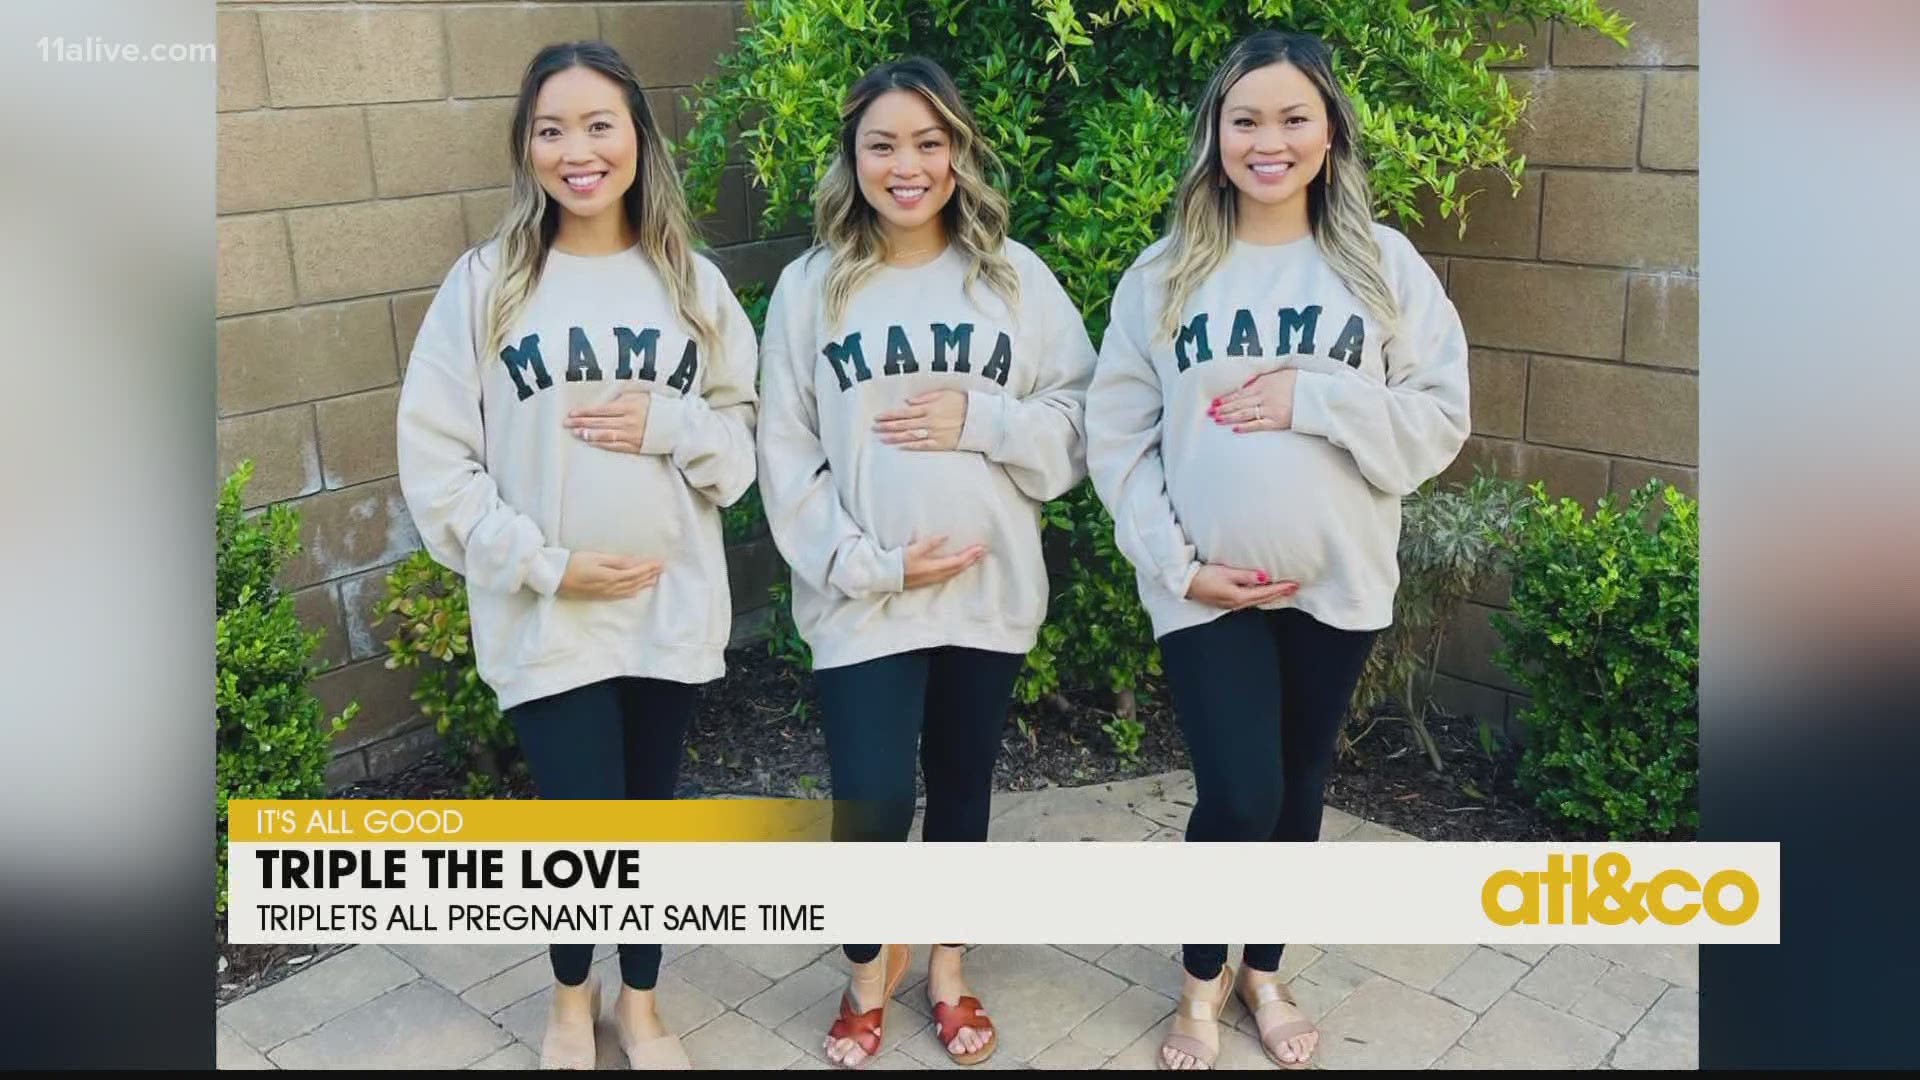 Sisters Gina Purcell, Nina Rawlings-Tran and Victoria Brown are all expecting babies between July and November of this year.